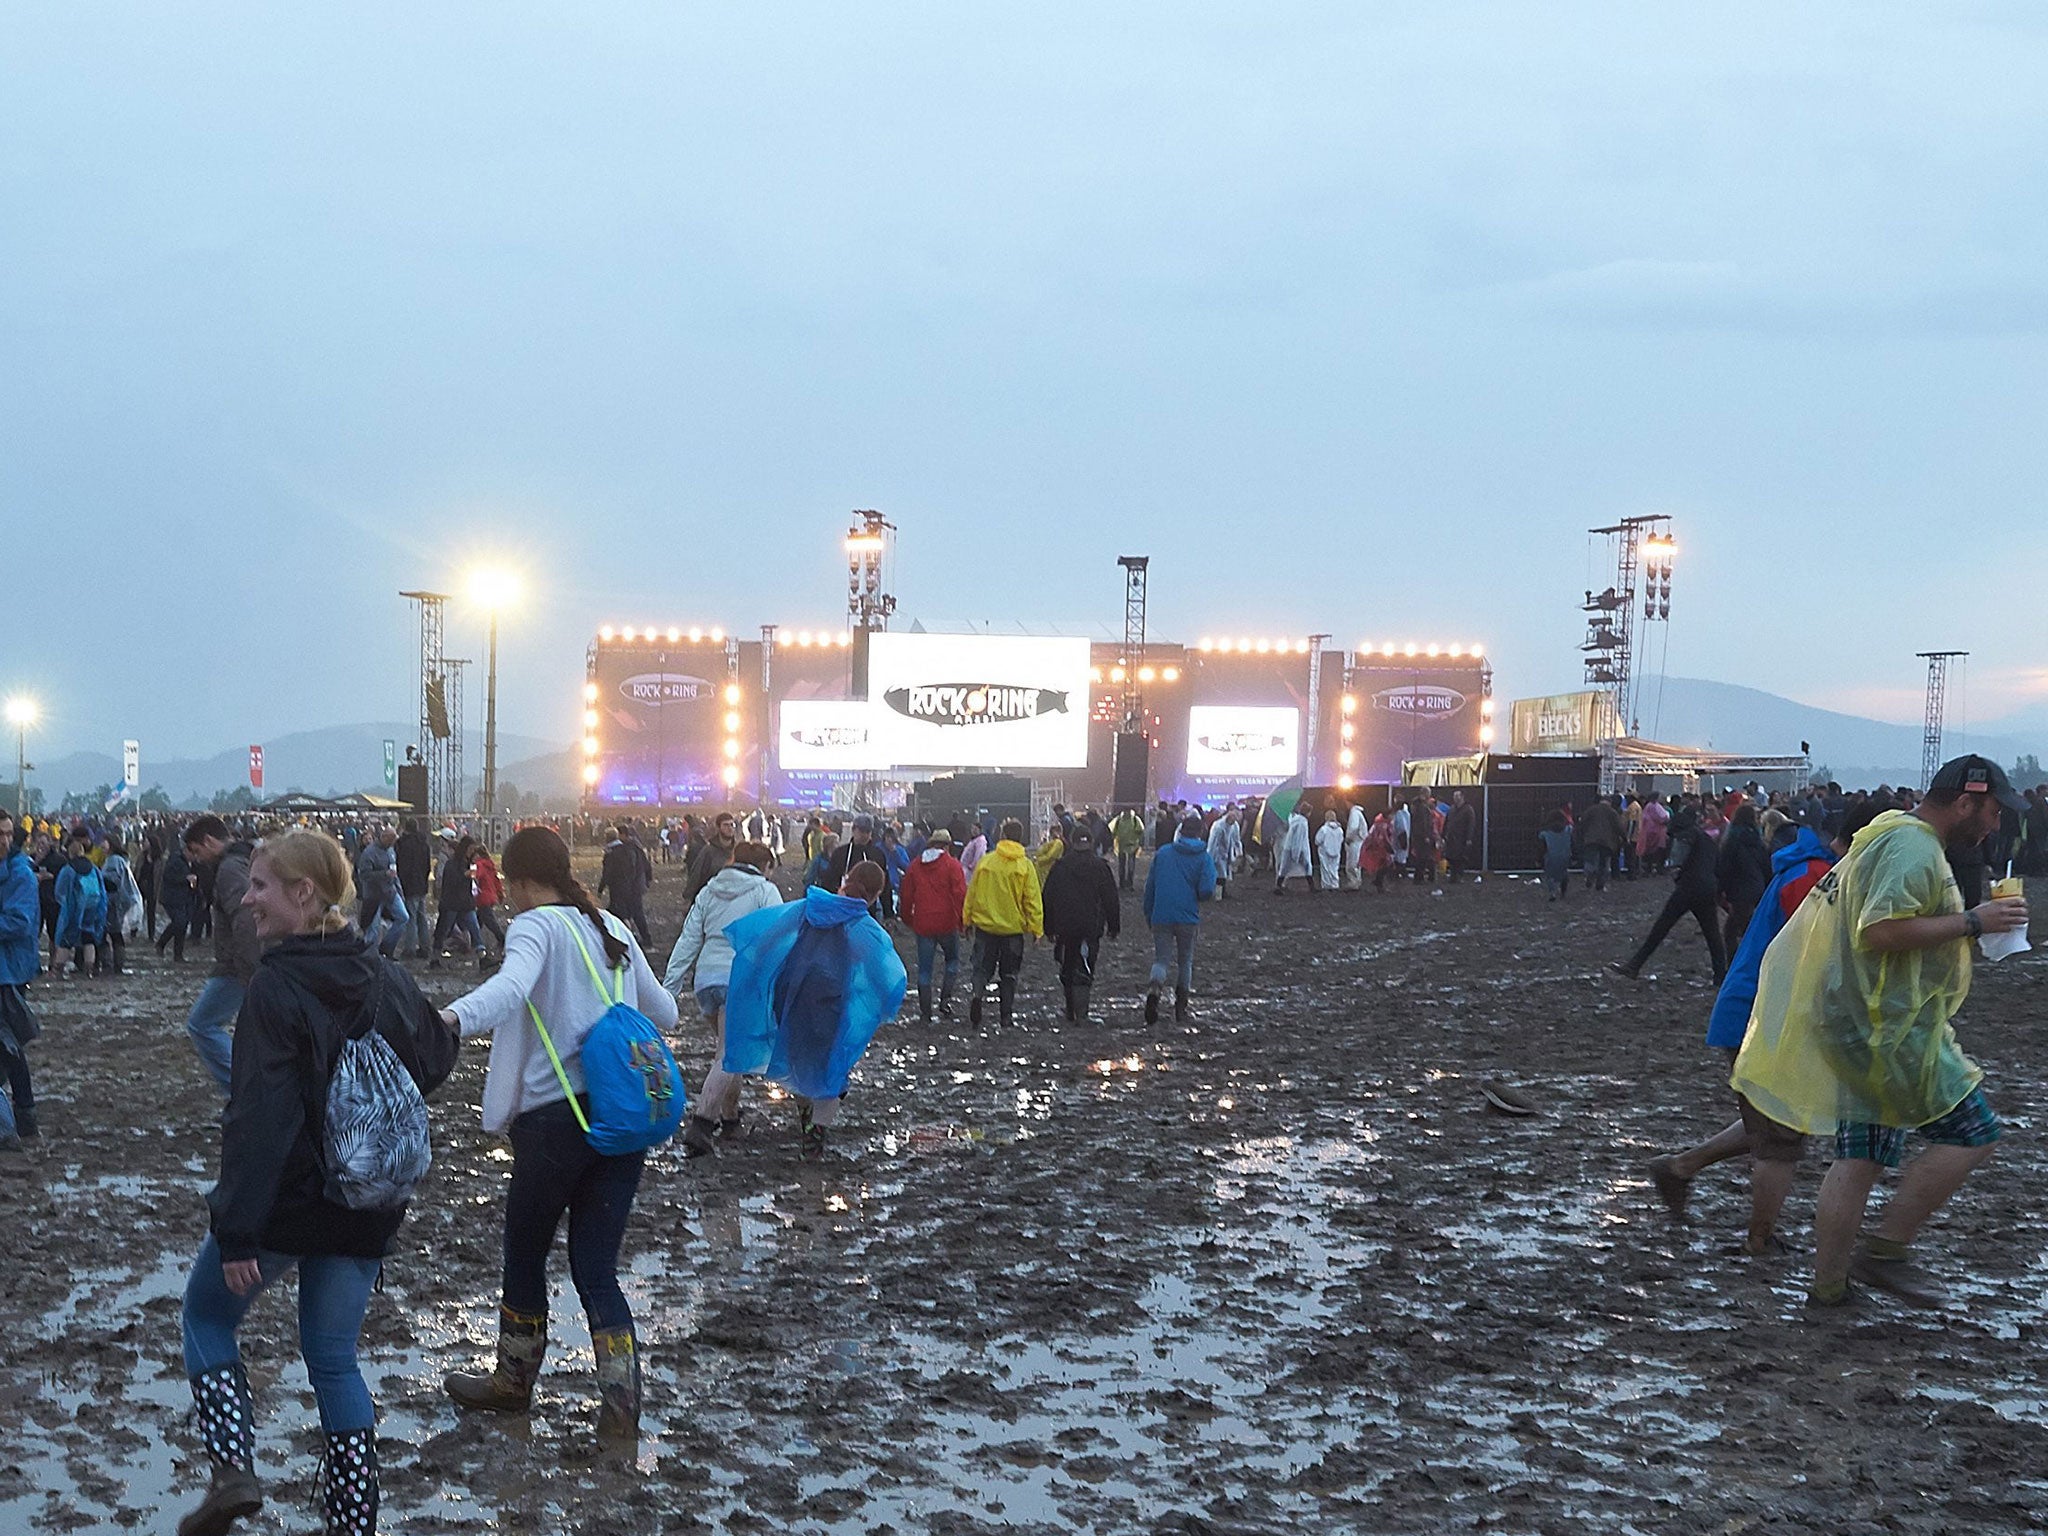 8 Facts About Rock Am Ring - Facts.net